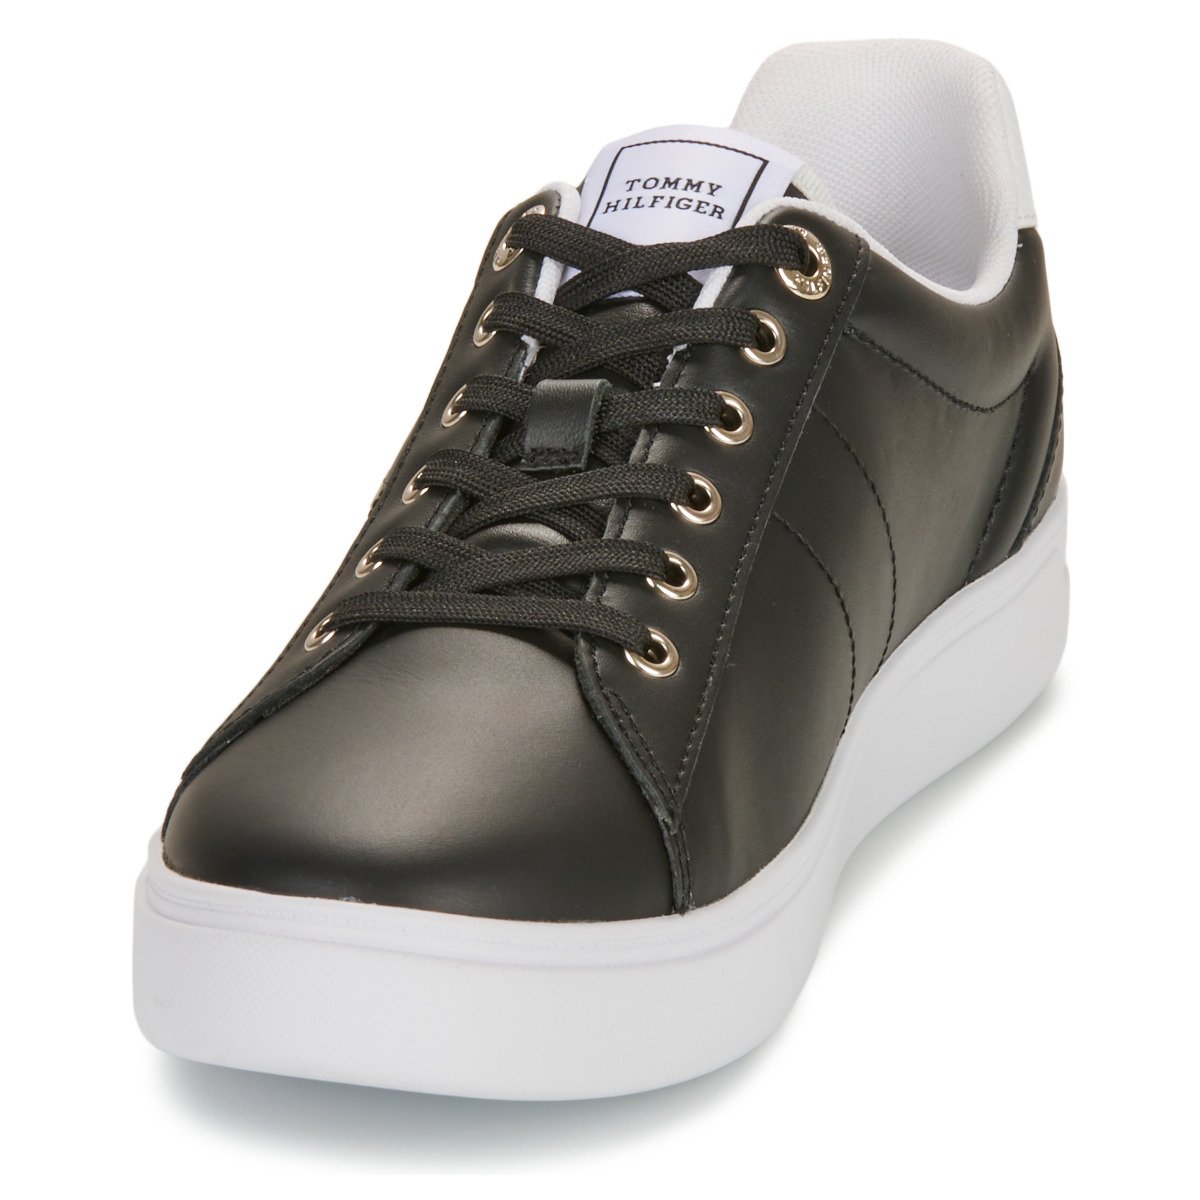 Shoes (Trainers) ESSENTIAL ELEVATED COURT SNEAKER